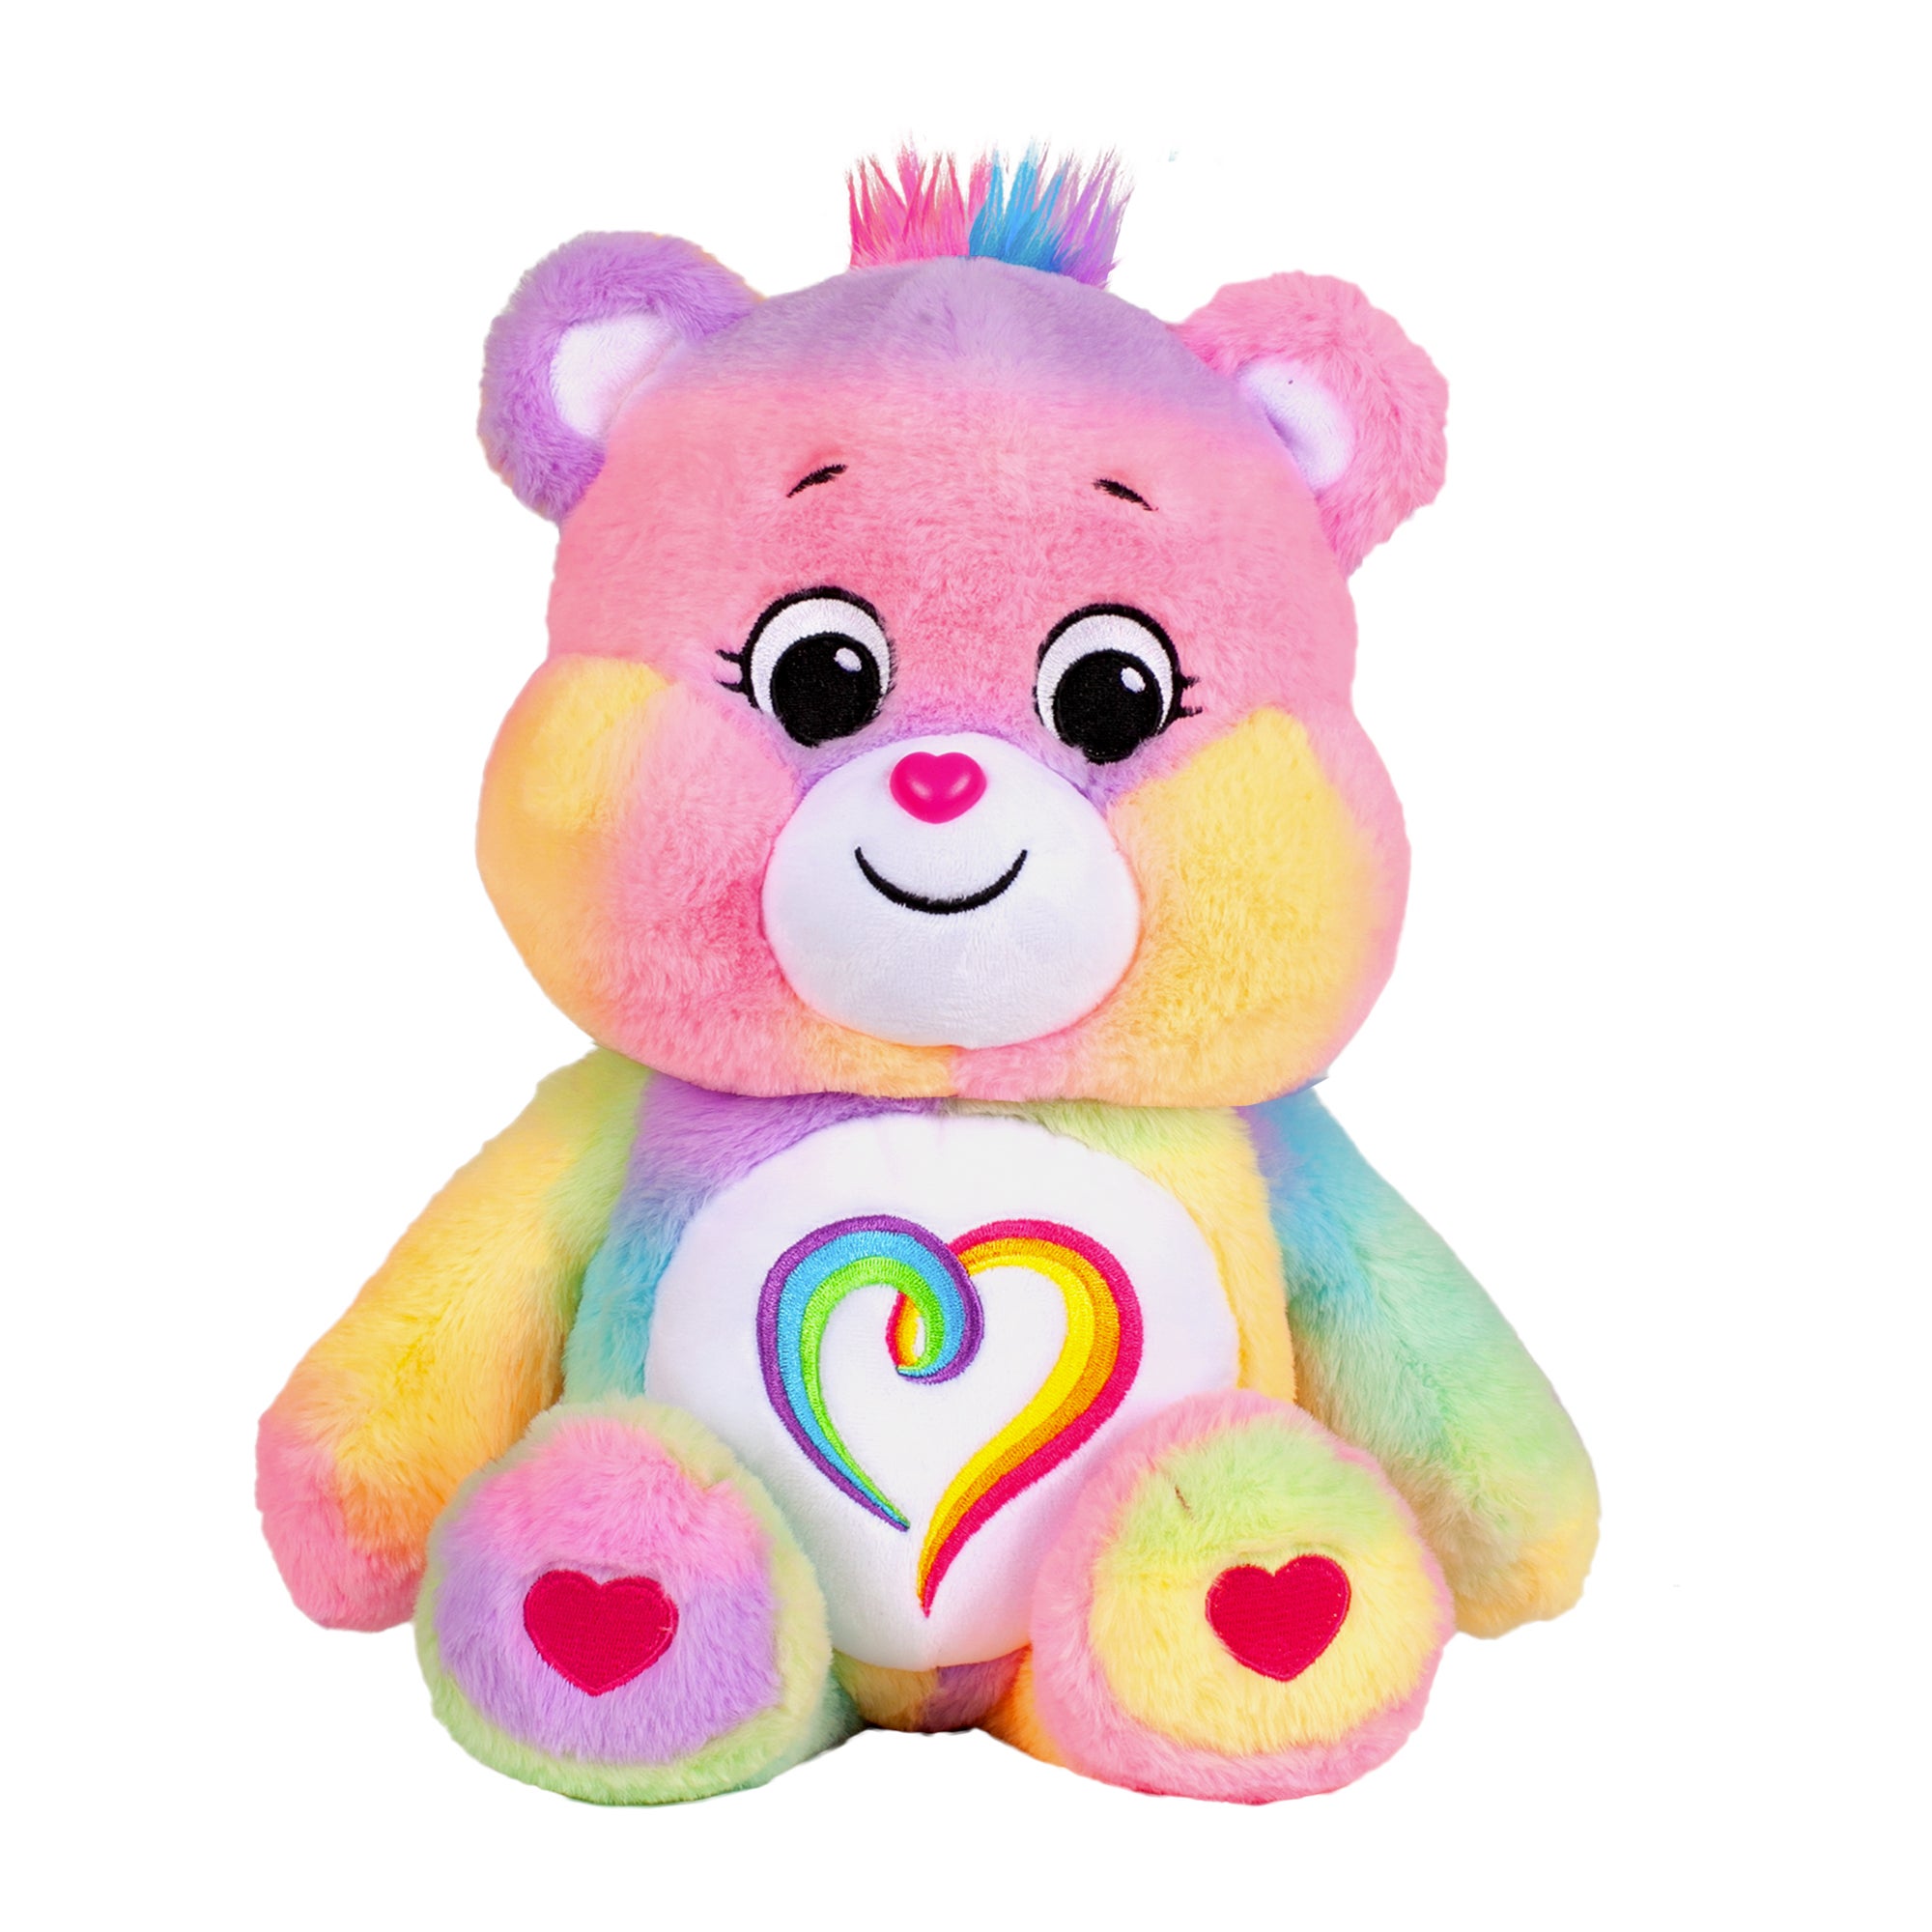 The Newest Care Bear Just Wants Everyone To Get Along